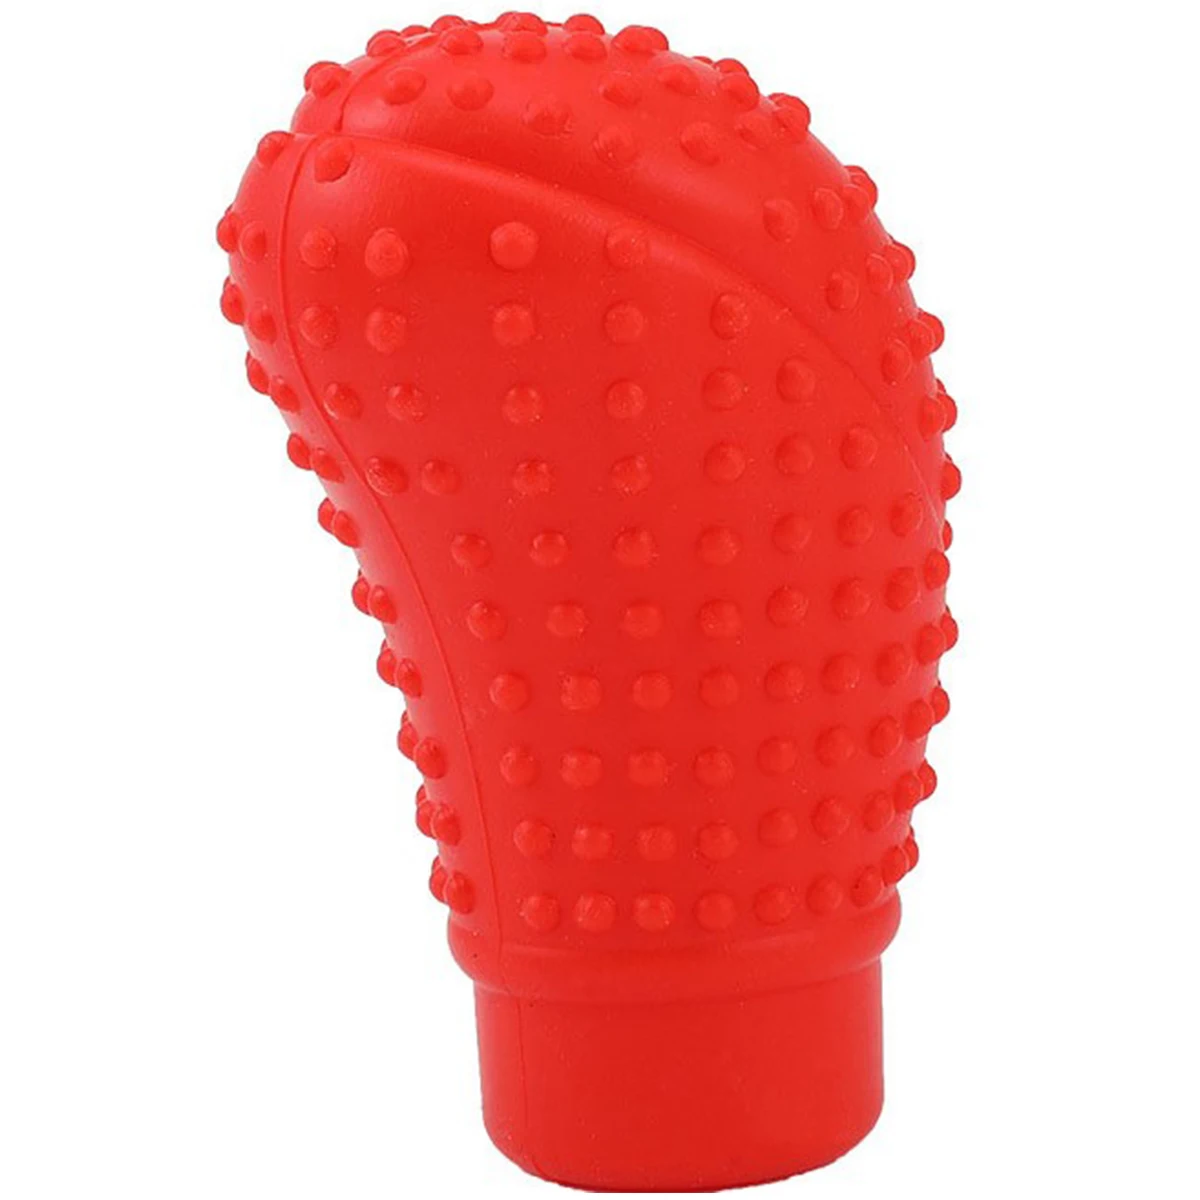 uxcell Red Soft Silicone Nonslip Car Manual Gear Shift Lever Knob Protective Cover 